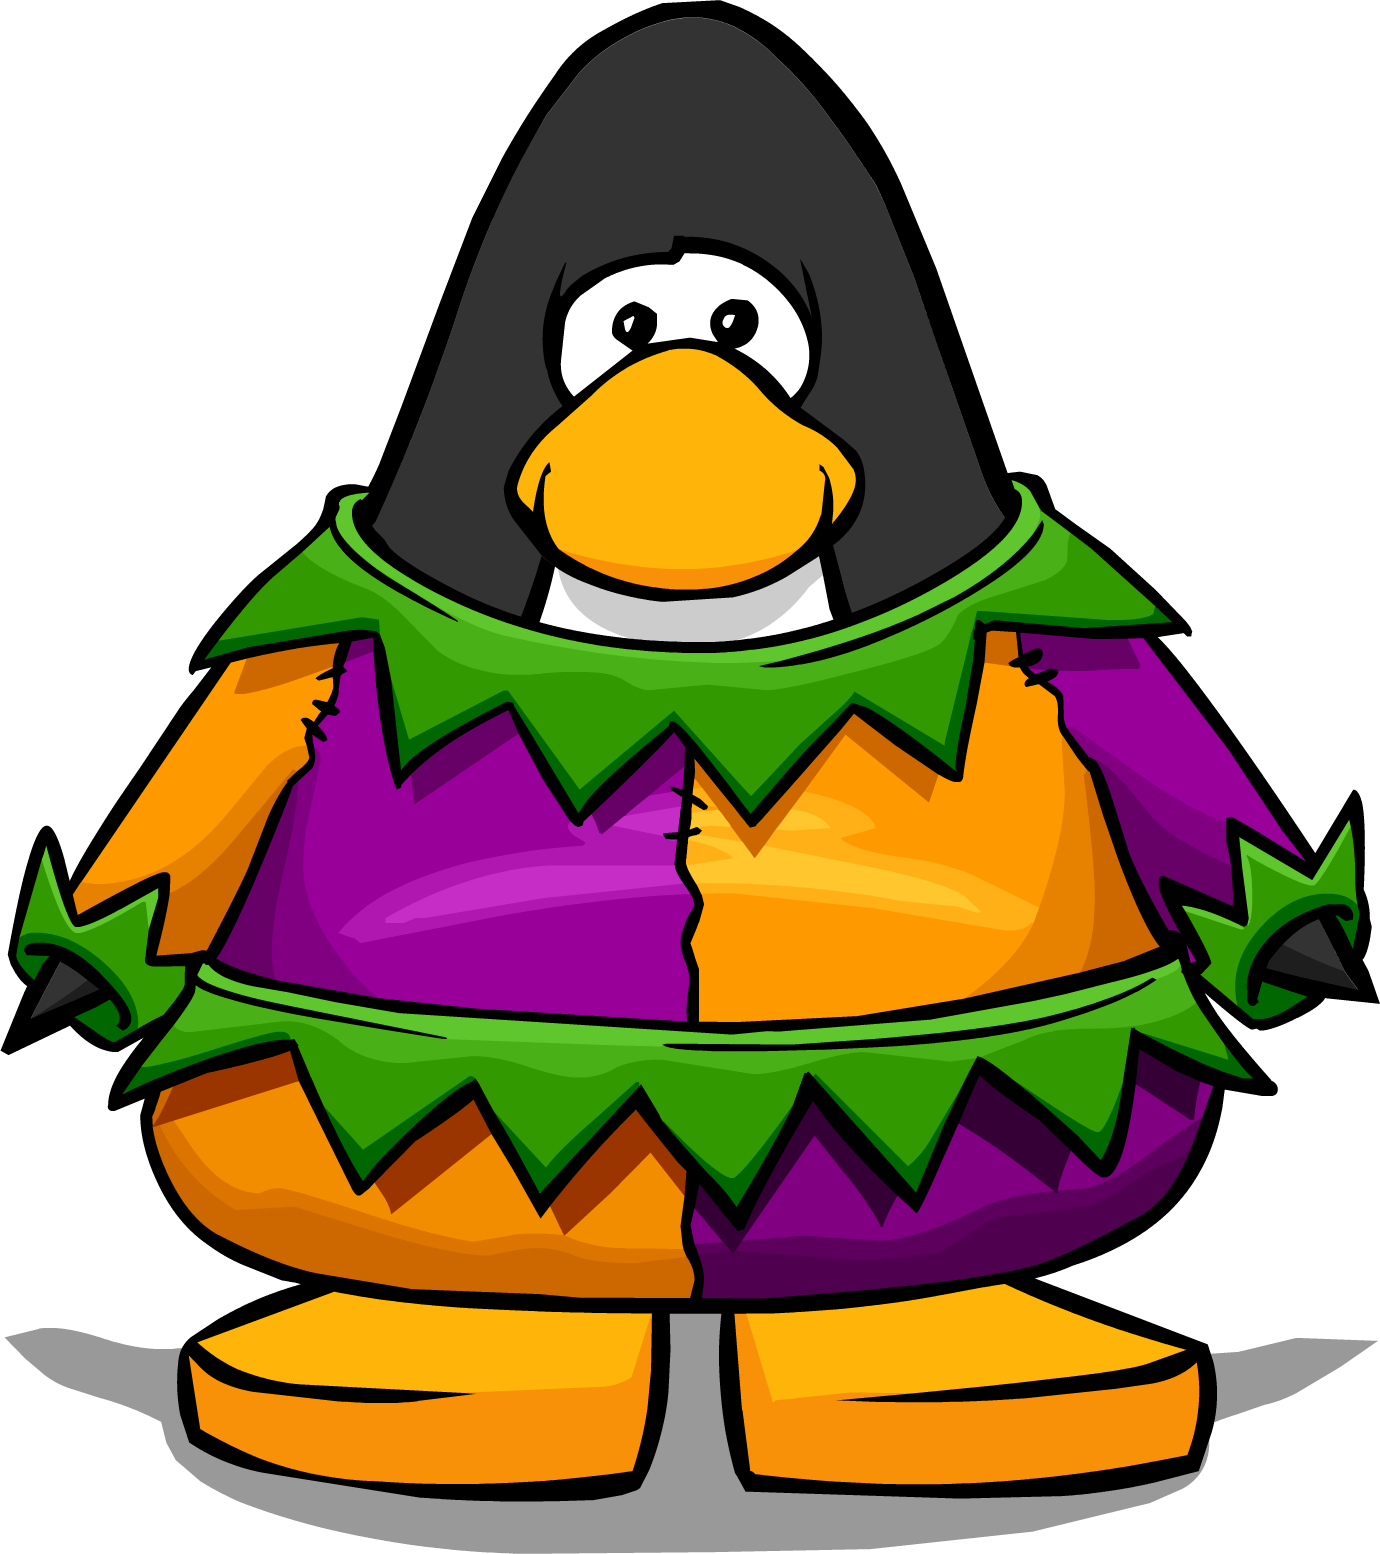 Court Jester From A Player Card - Club Penguin Bling Bling Necklace (1380x1554)